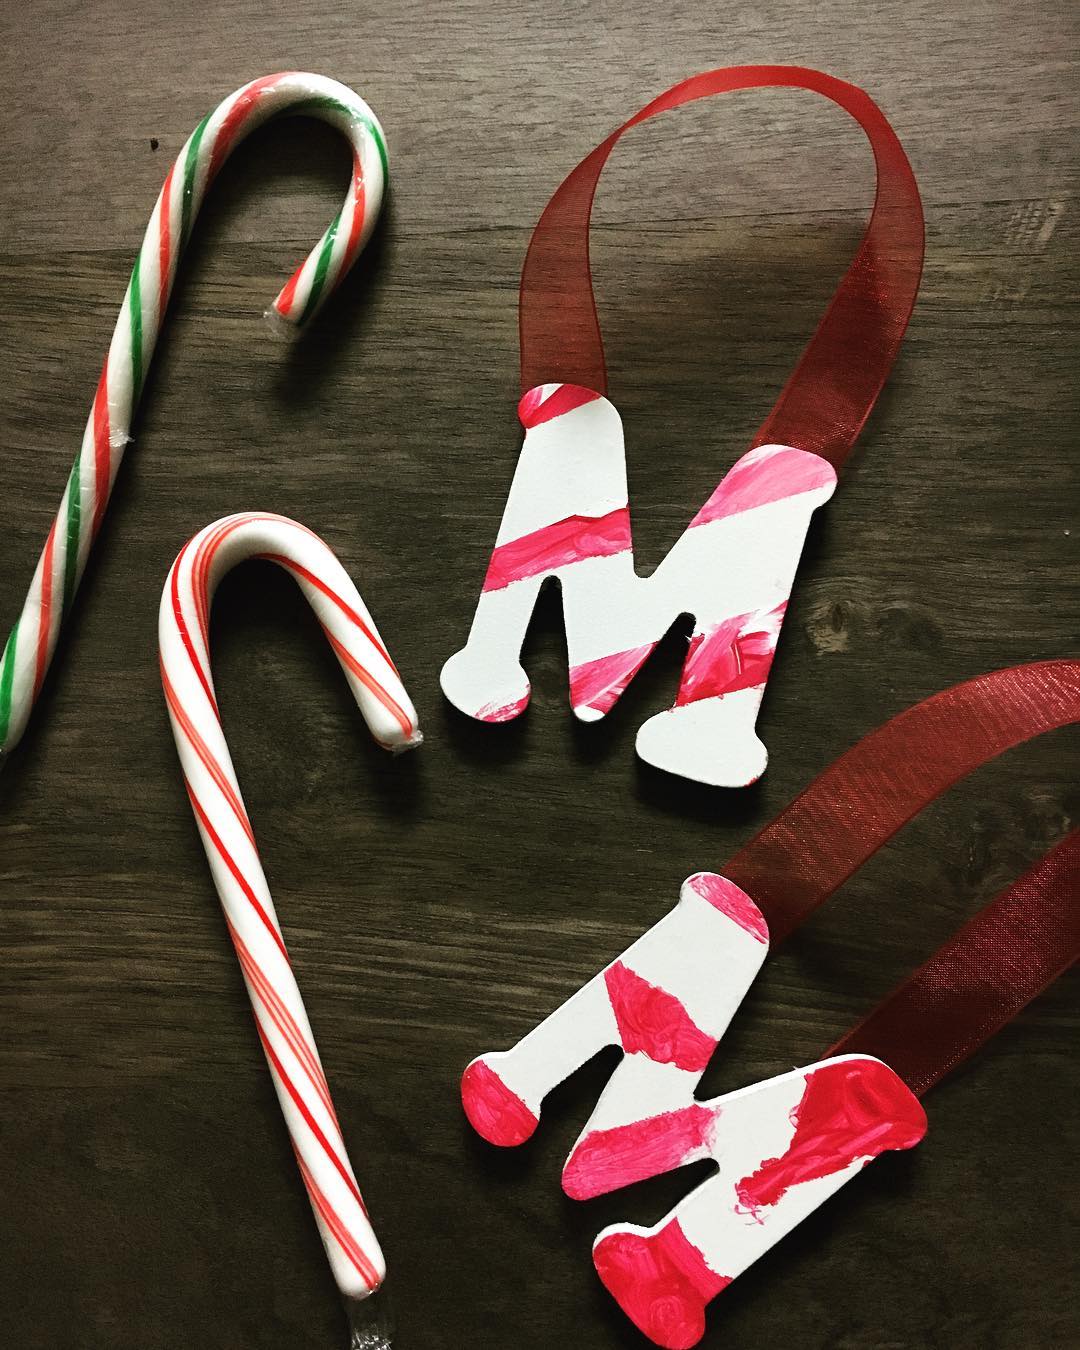 Here are some candy cane letter ornaments the kids painted on Christmas Day. Super simple and they turned out lovely!